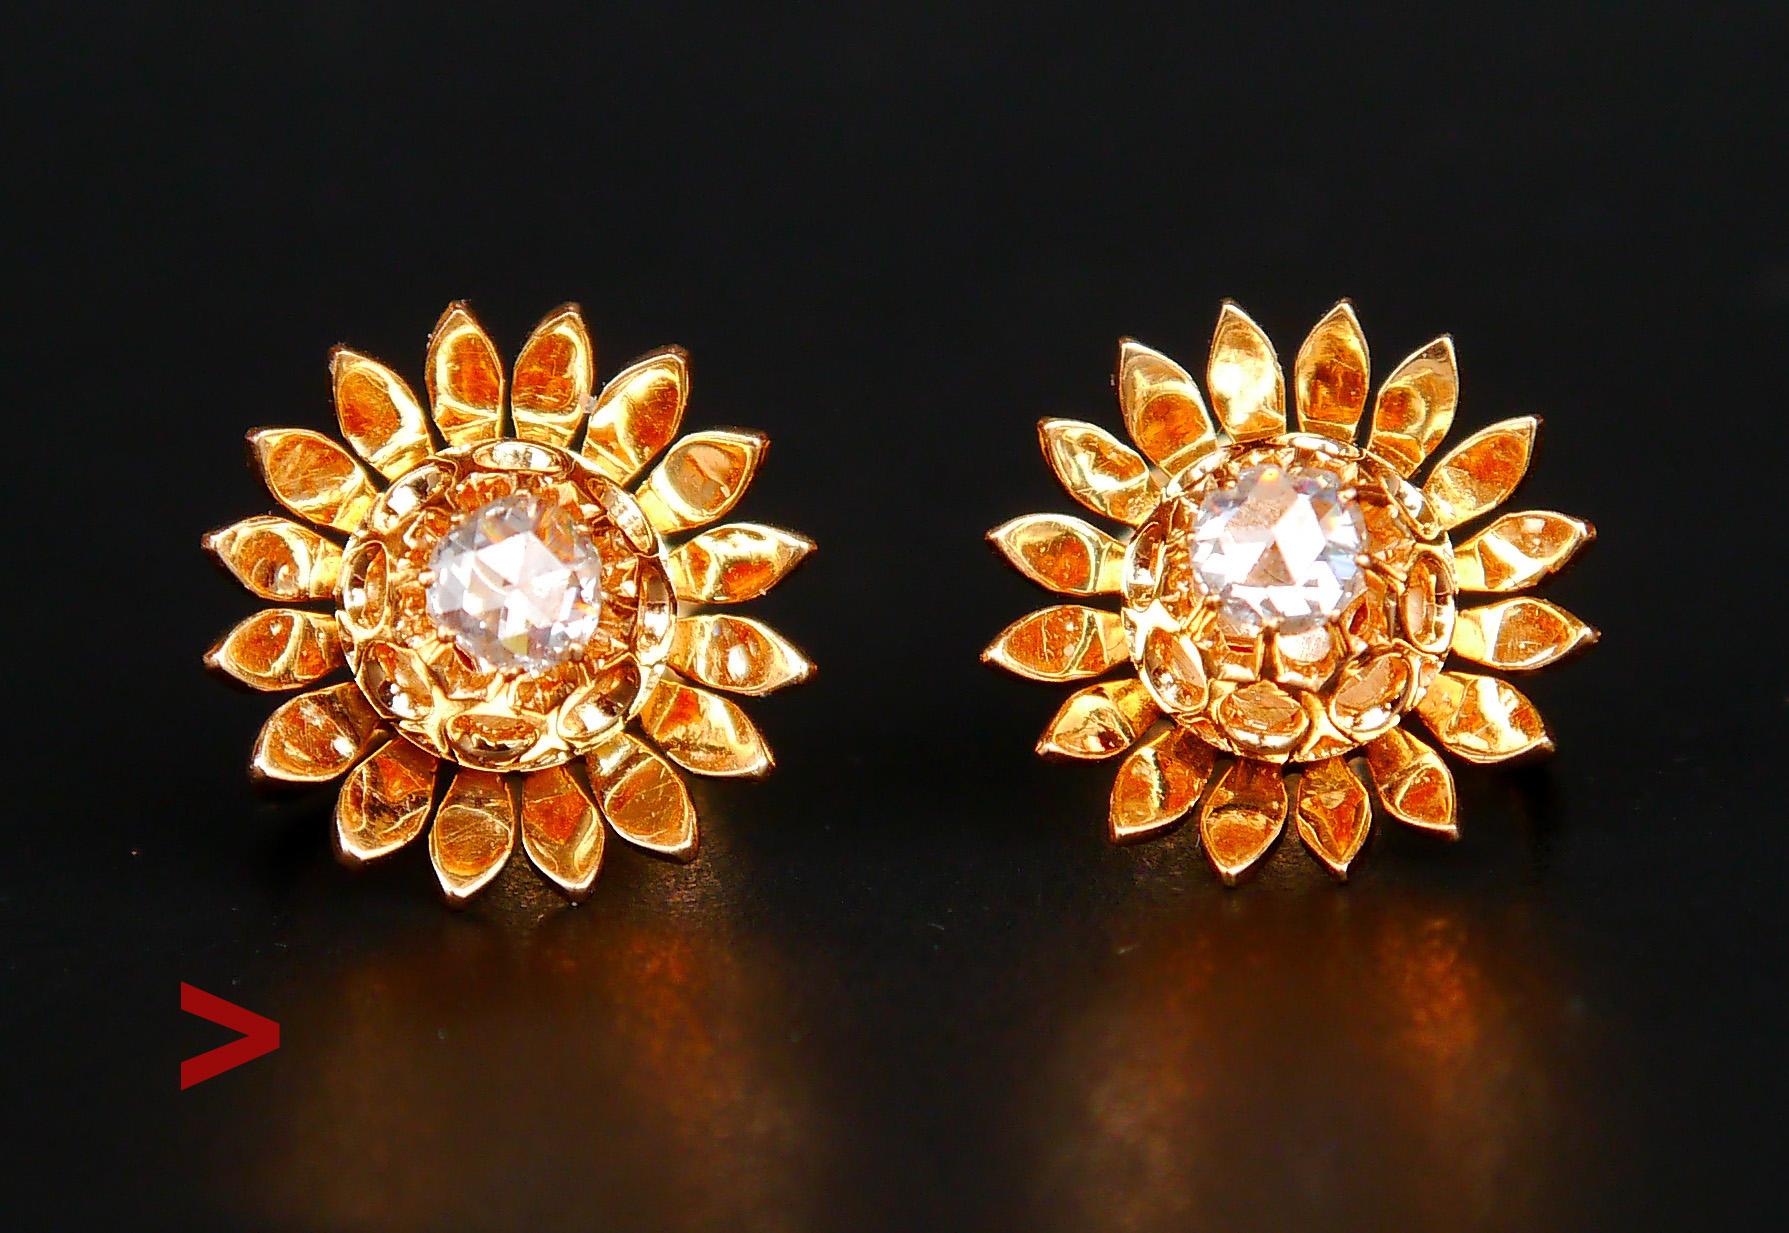 A pair of fine sparky flowers in solid 18K Yellow Gold. Each earring Ø 8.5 mm x 6 mm deep. Each has 16 delicate petals around openwork clusters with claw set rose cut Diamonds. Each stone measures Ø4 mm / ca. 0.28 ct each, color ca F,G /VS .

Hand -